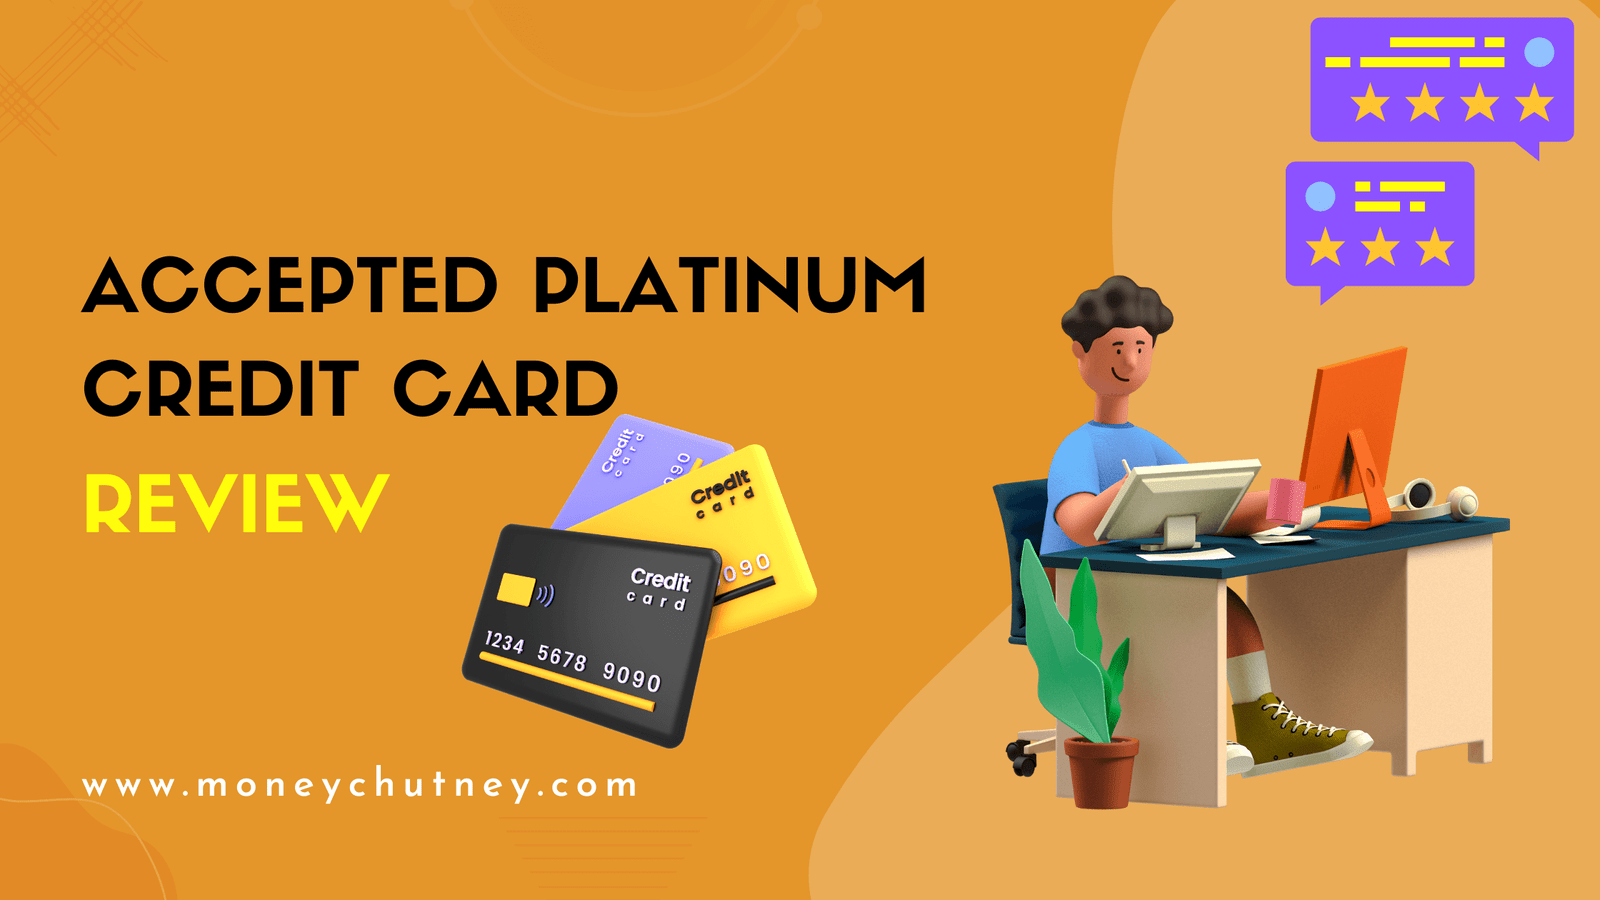 Accepted Platinum Credit Card Review: Benefits and Rewards